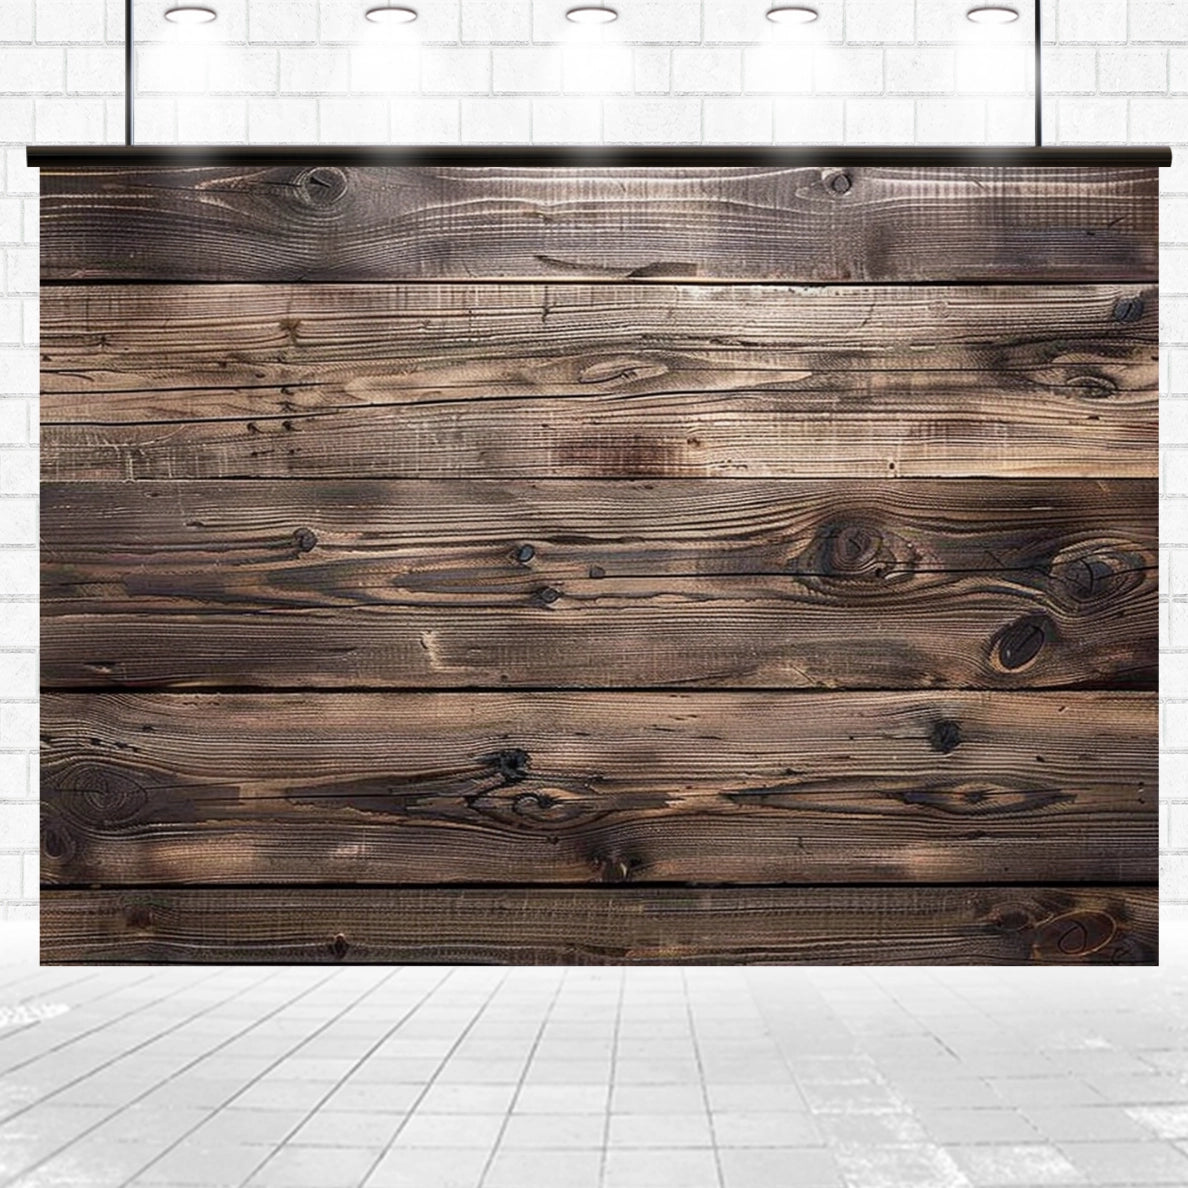 A photo of the 7x5ft Vintage Wood Backdrop Retro Rustic Wooden Floor Background for Photography Photo Booth Video Shoot Studio Props by ideasbackdrop, set against a tiled floor and illuminated by overhead lights.